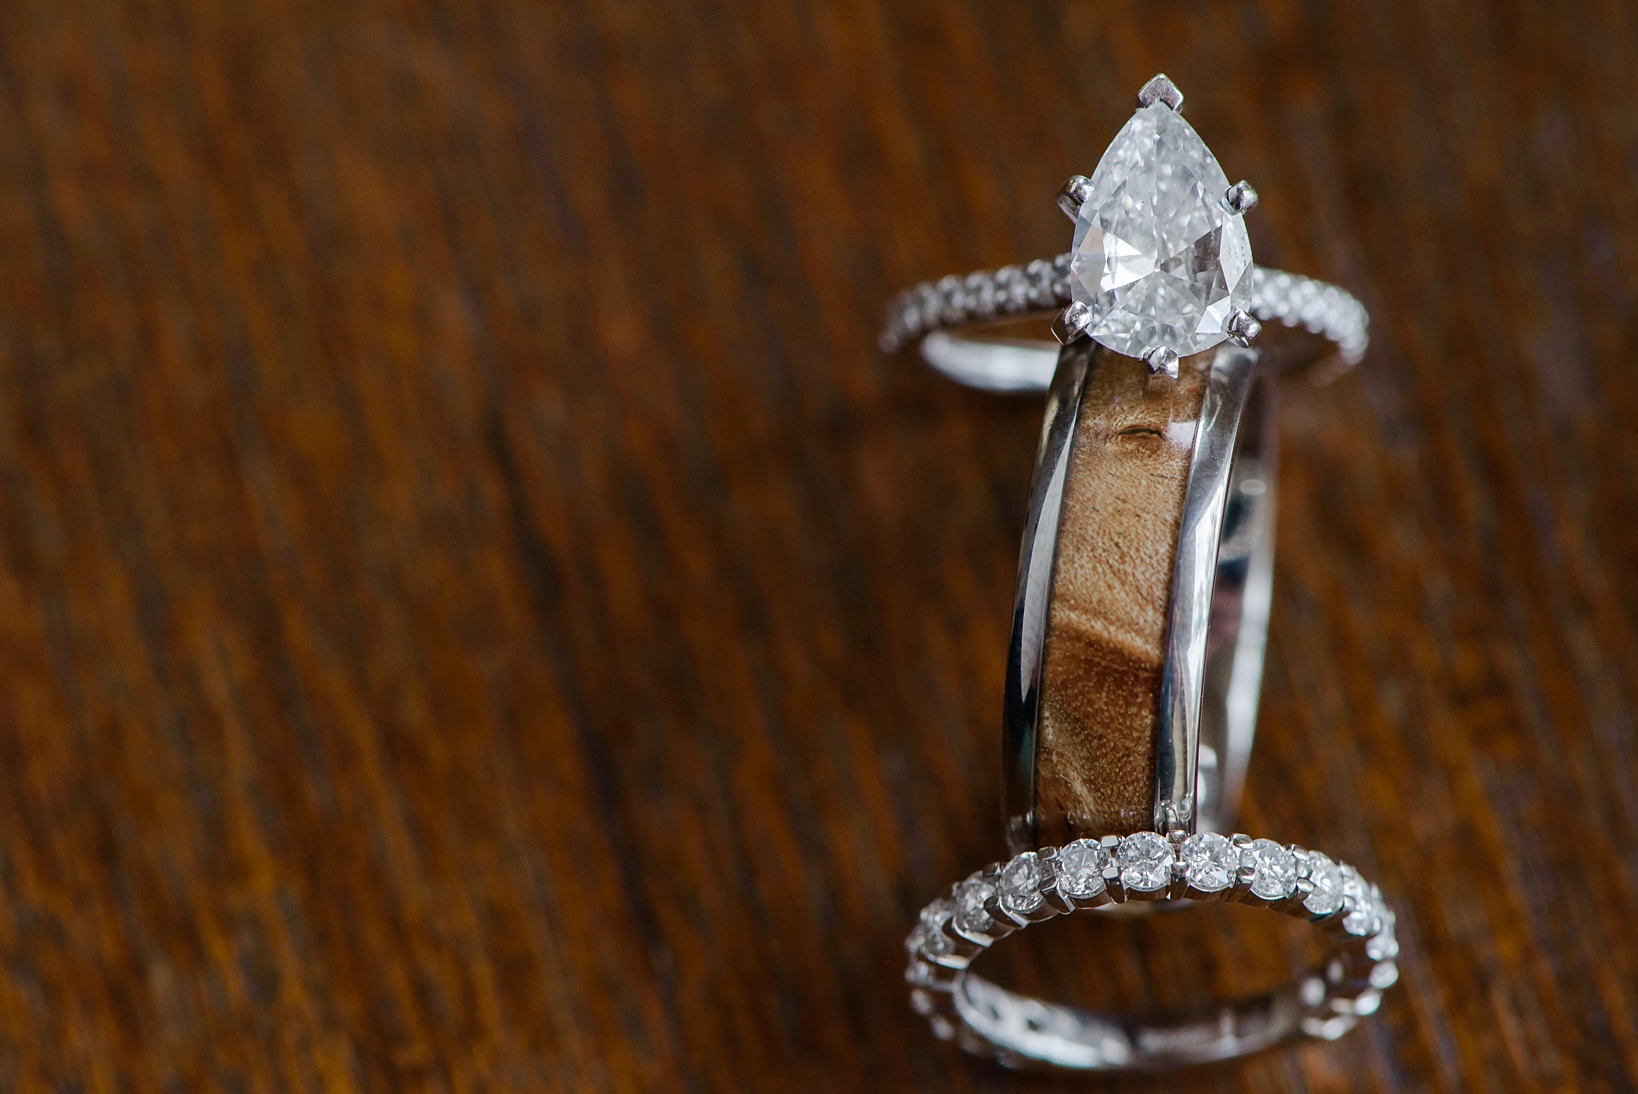 The wedding rings against a wood grain background